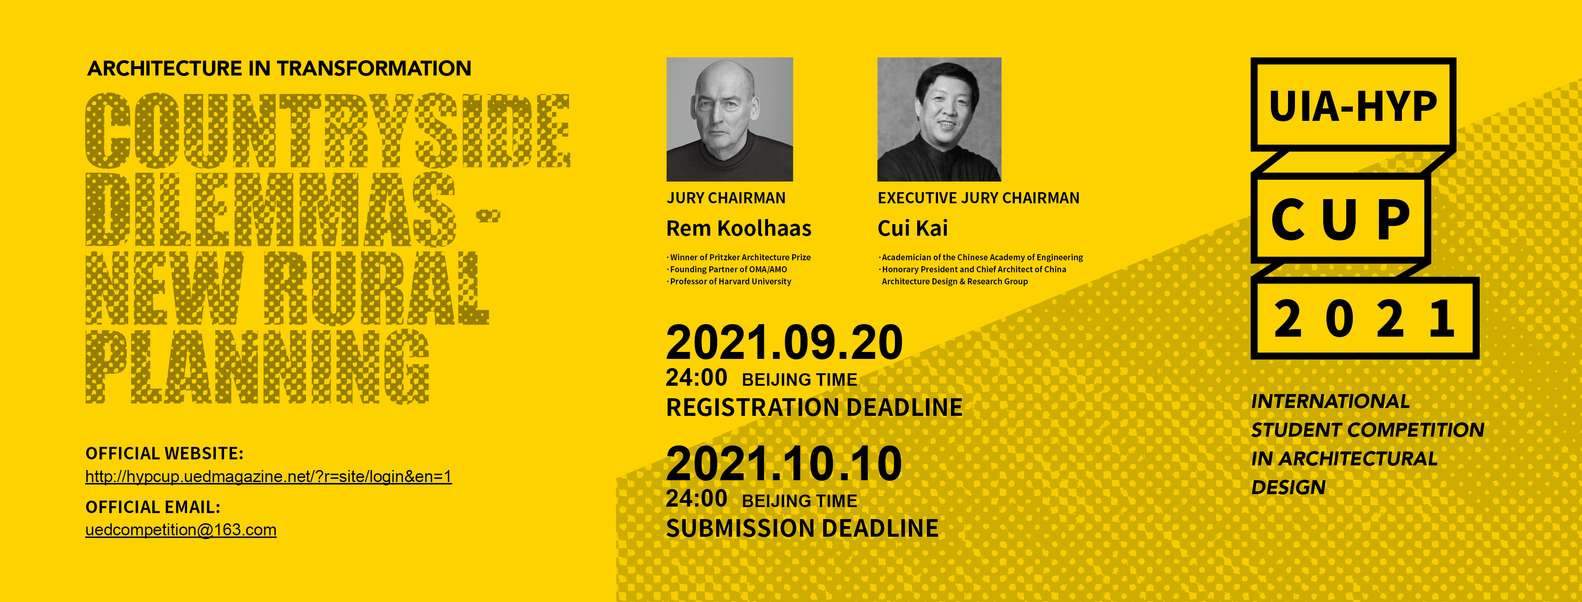 OPEN CALL: UIA-HYP CUP 2021 Competition for International Students in Architectural Design